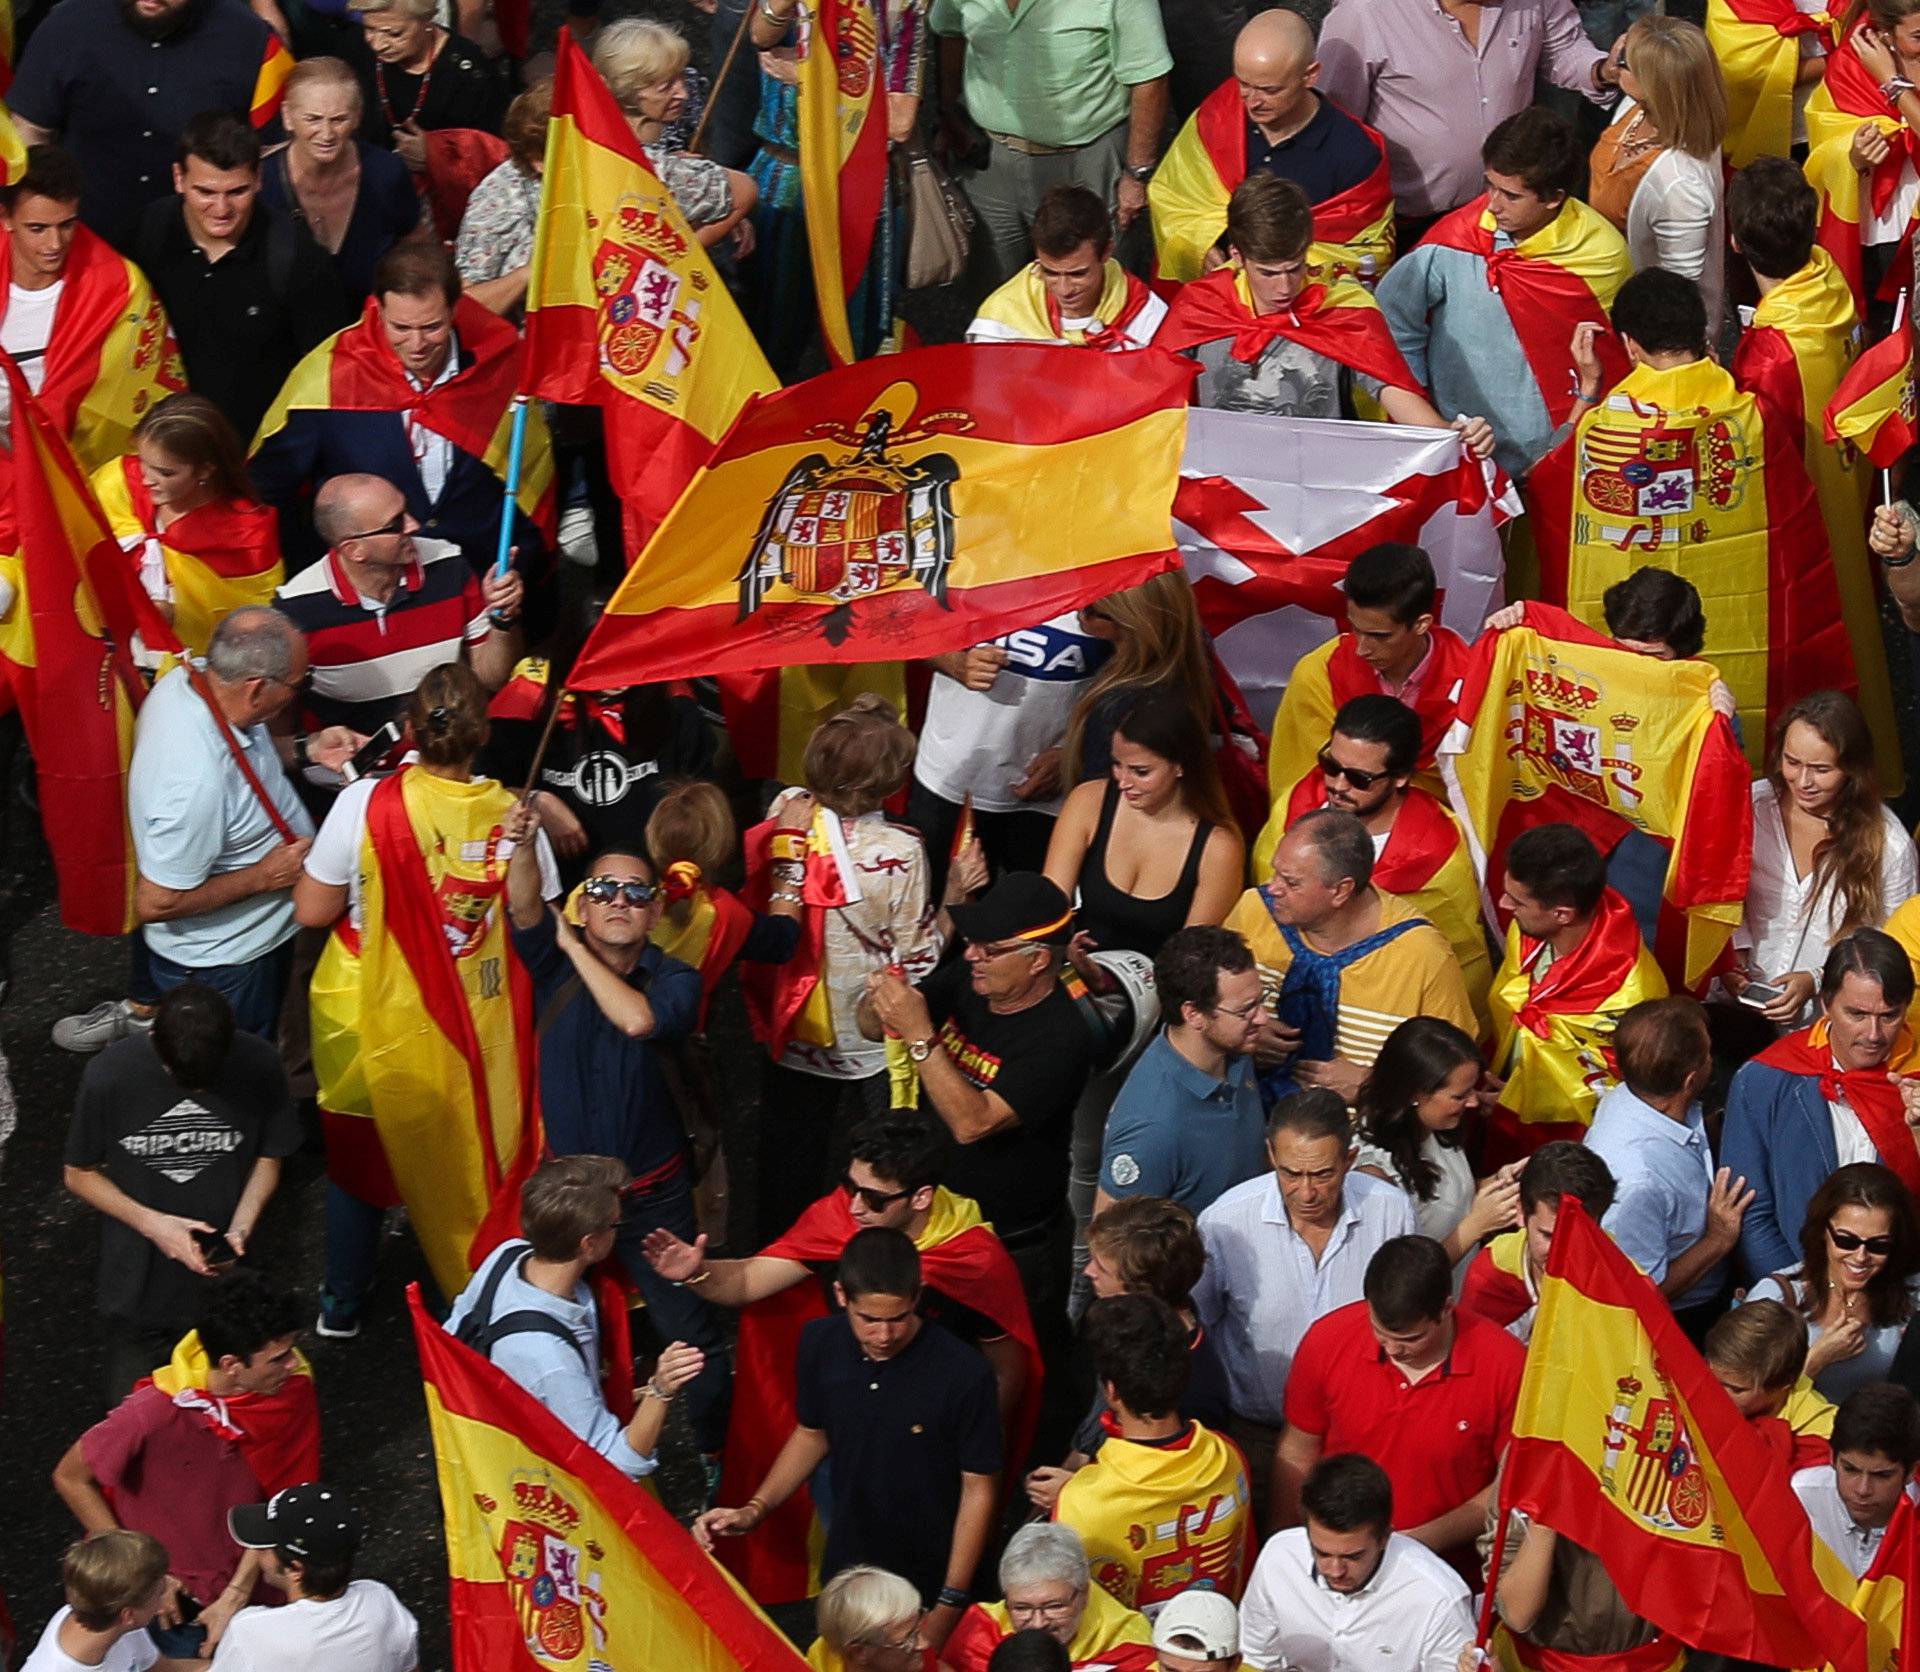 A demonstrator waves a pre-constitutional Spanish flag in front of city hall during a demonstration in favor of a unified Spain a day before the banned October 1 independence referendum, in Madrid